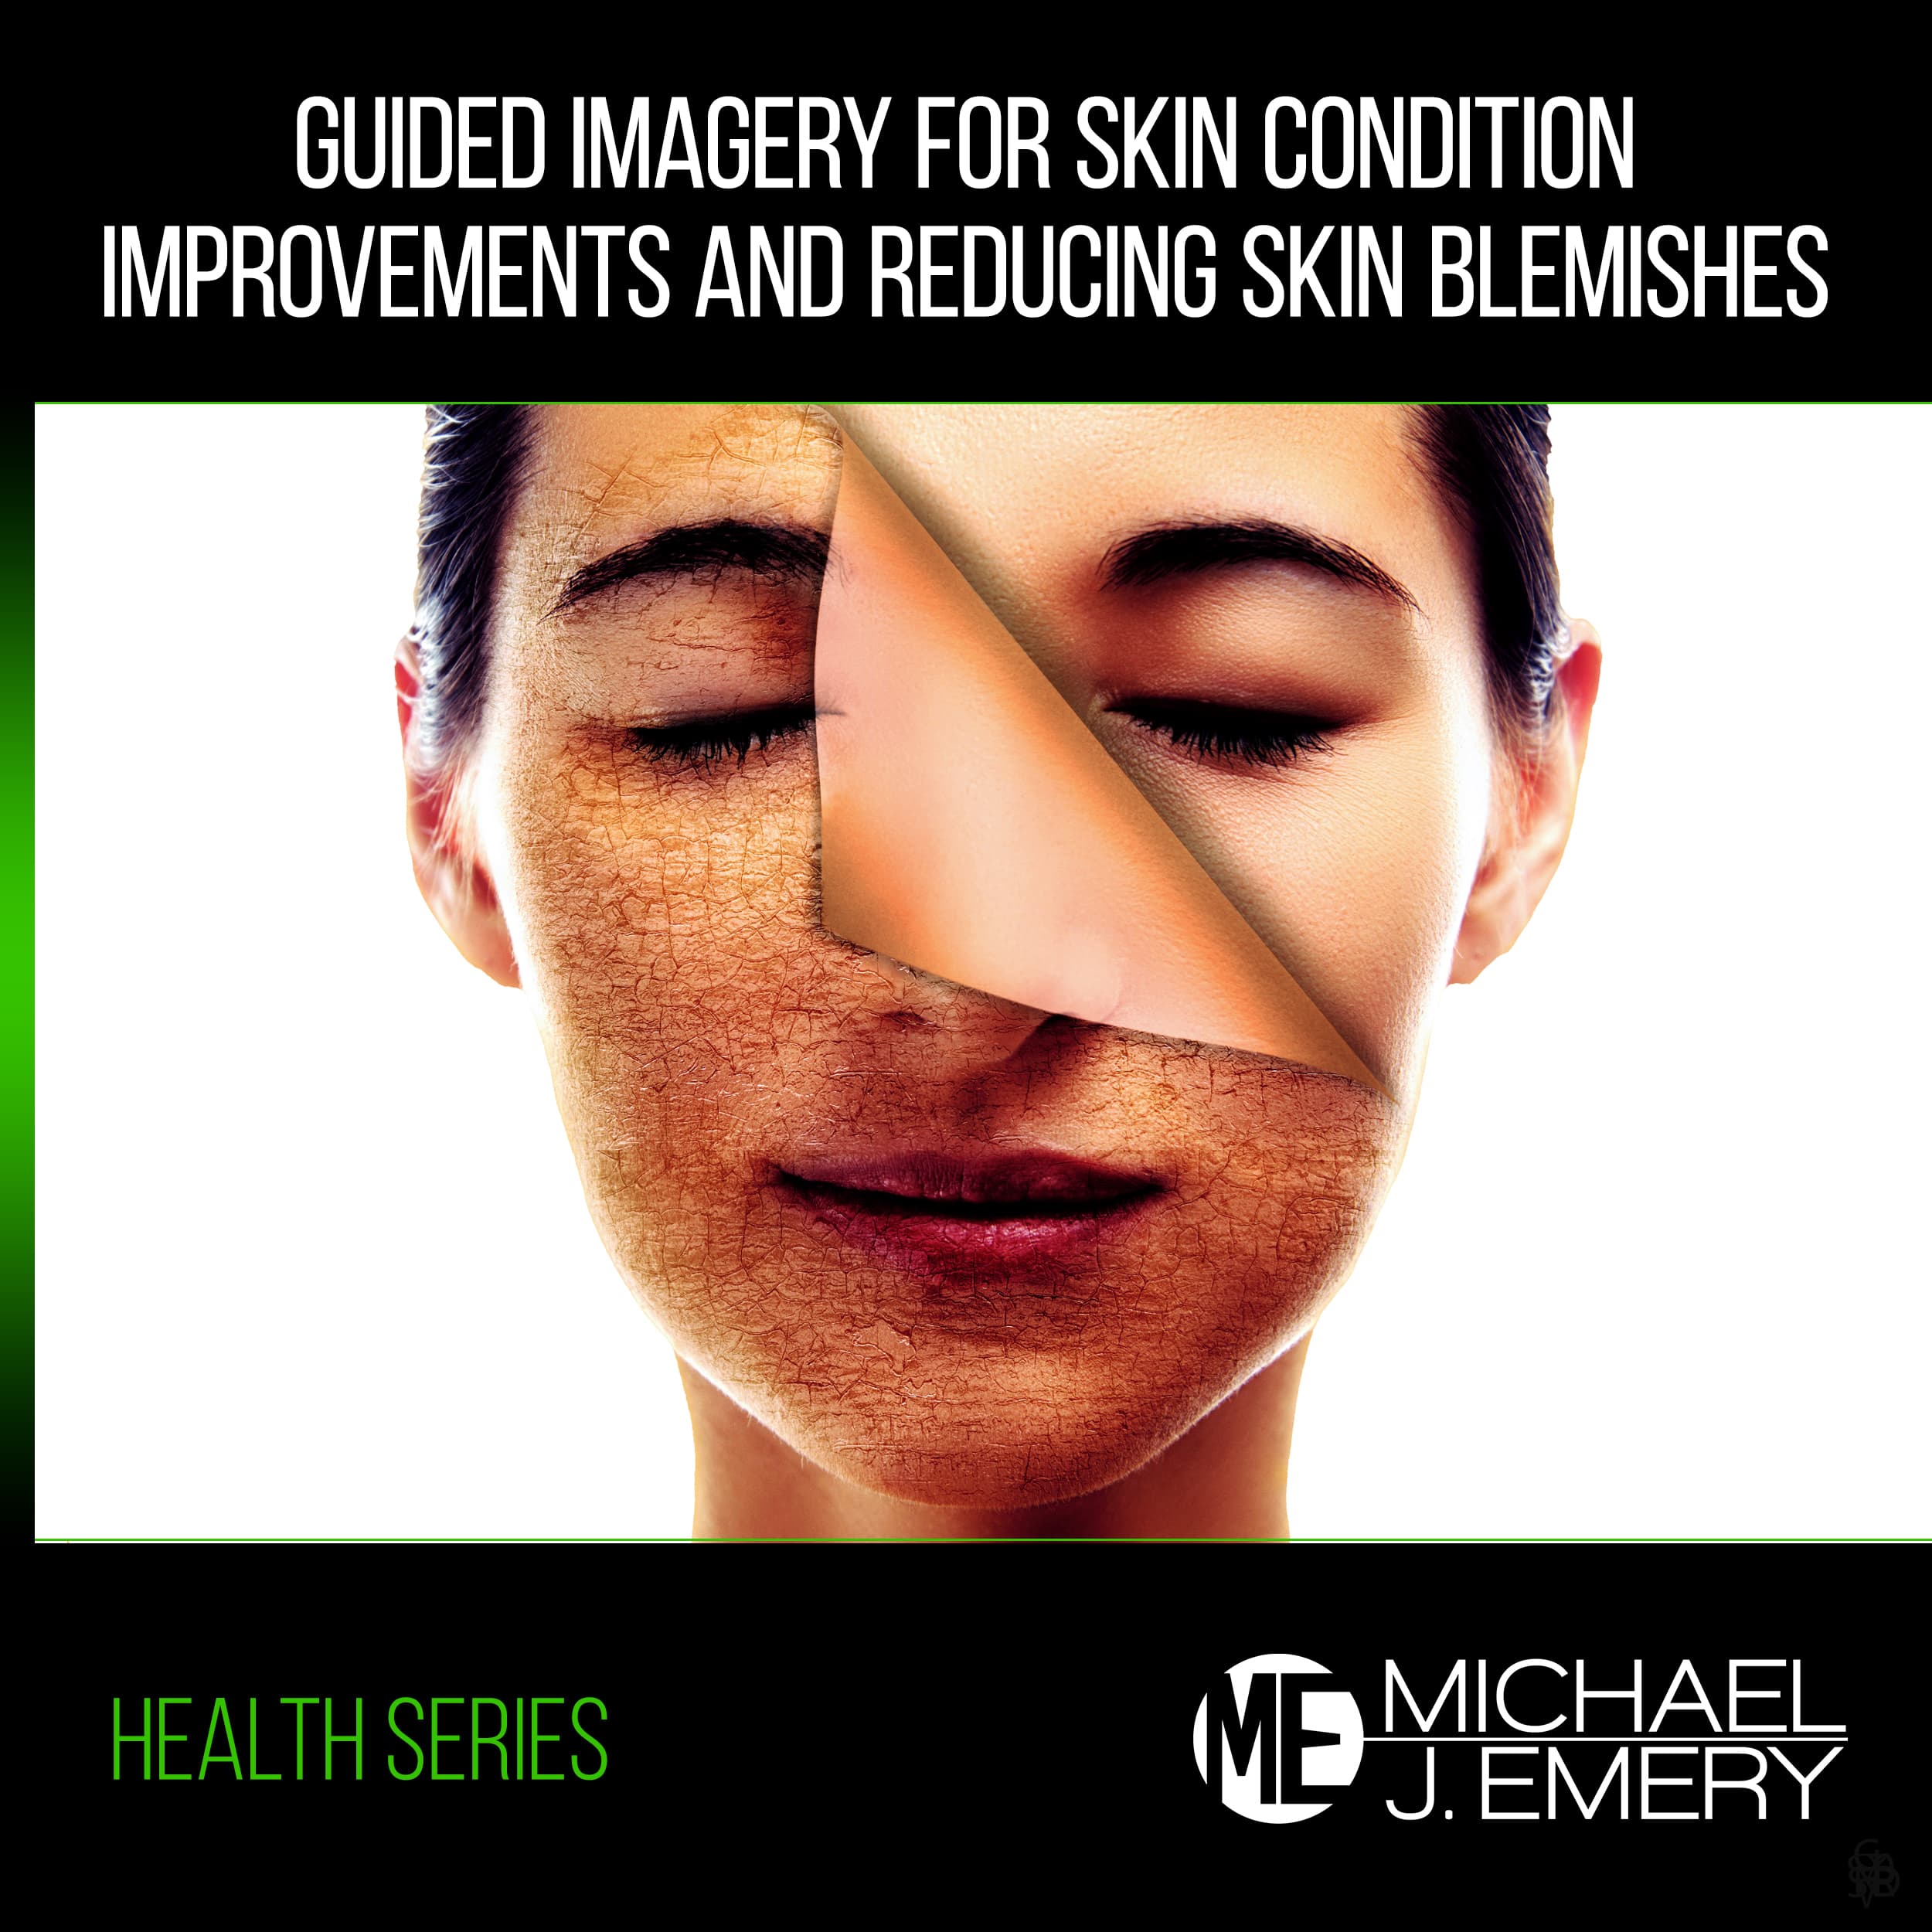 Guided-Imagery-for-Skin-Condition-Improvements-and-Reducing-Skin-Blemishes